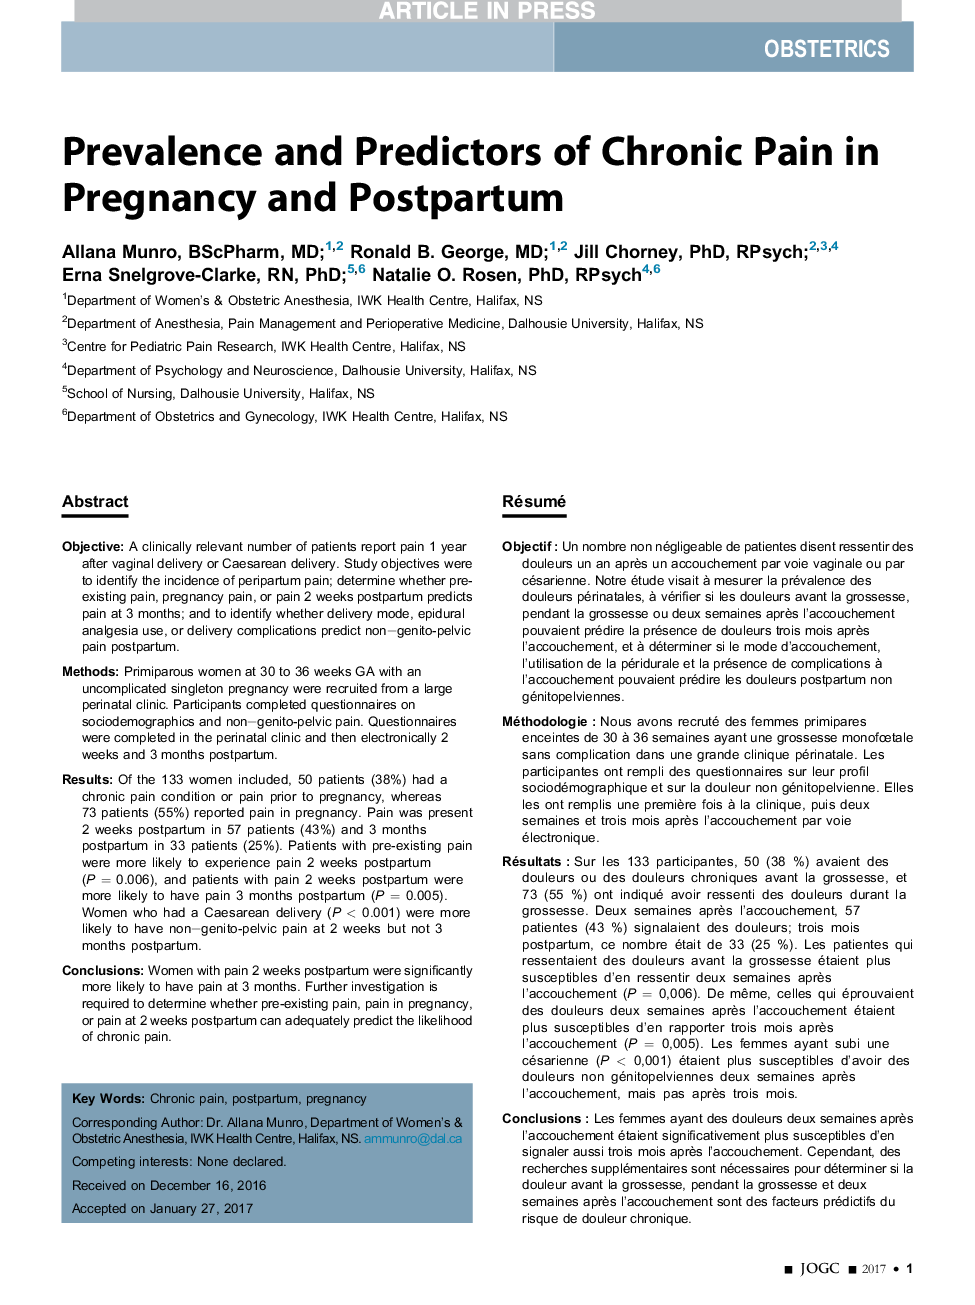 Prevalence and Predictors of Chronic Pain in Pregnancy and Postpartum